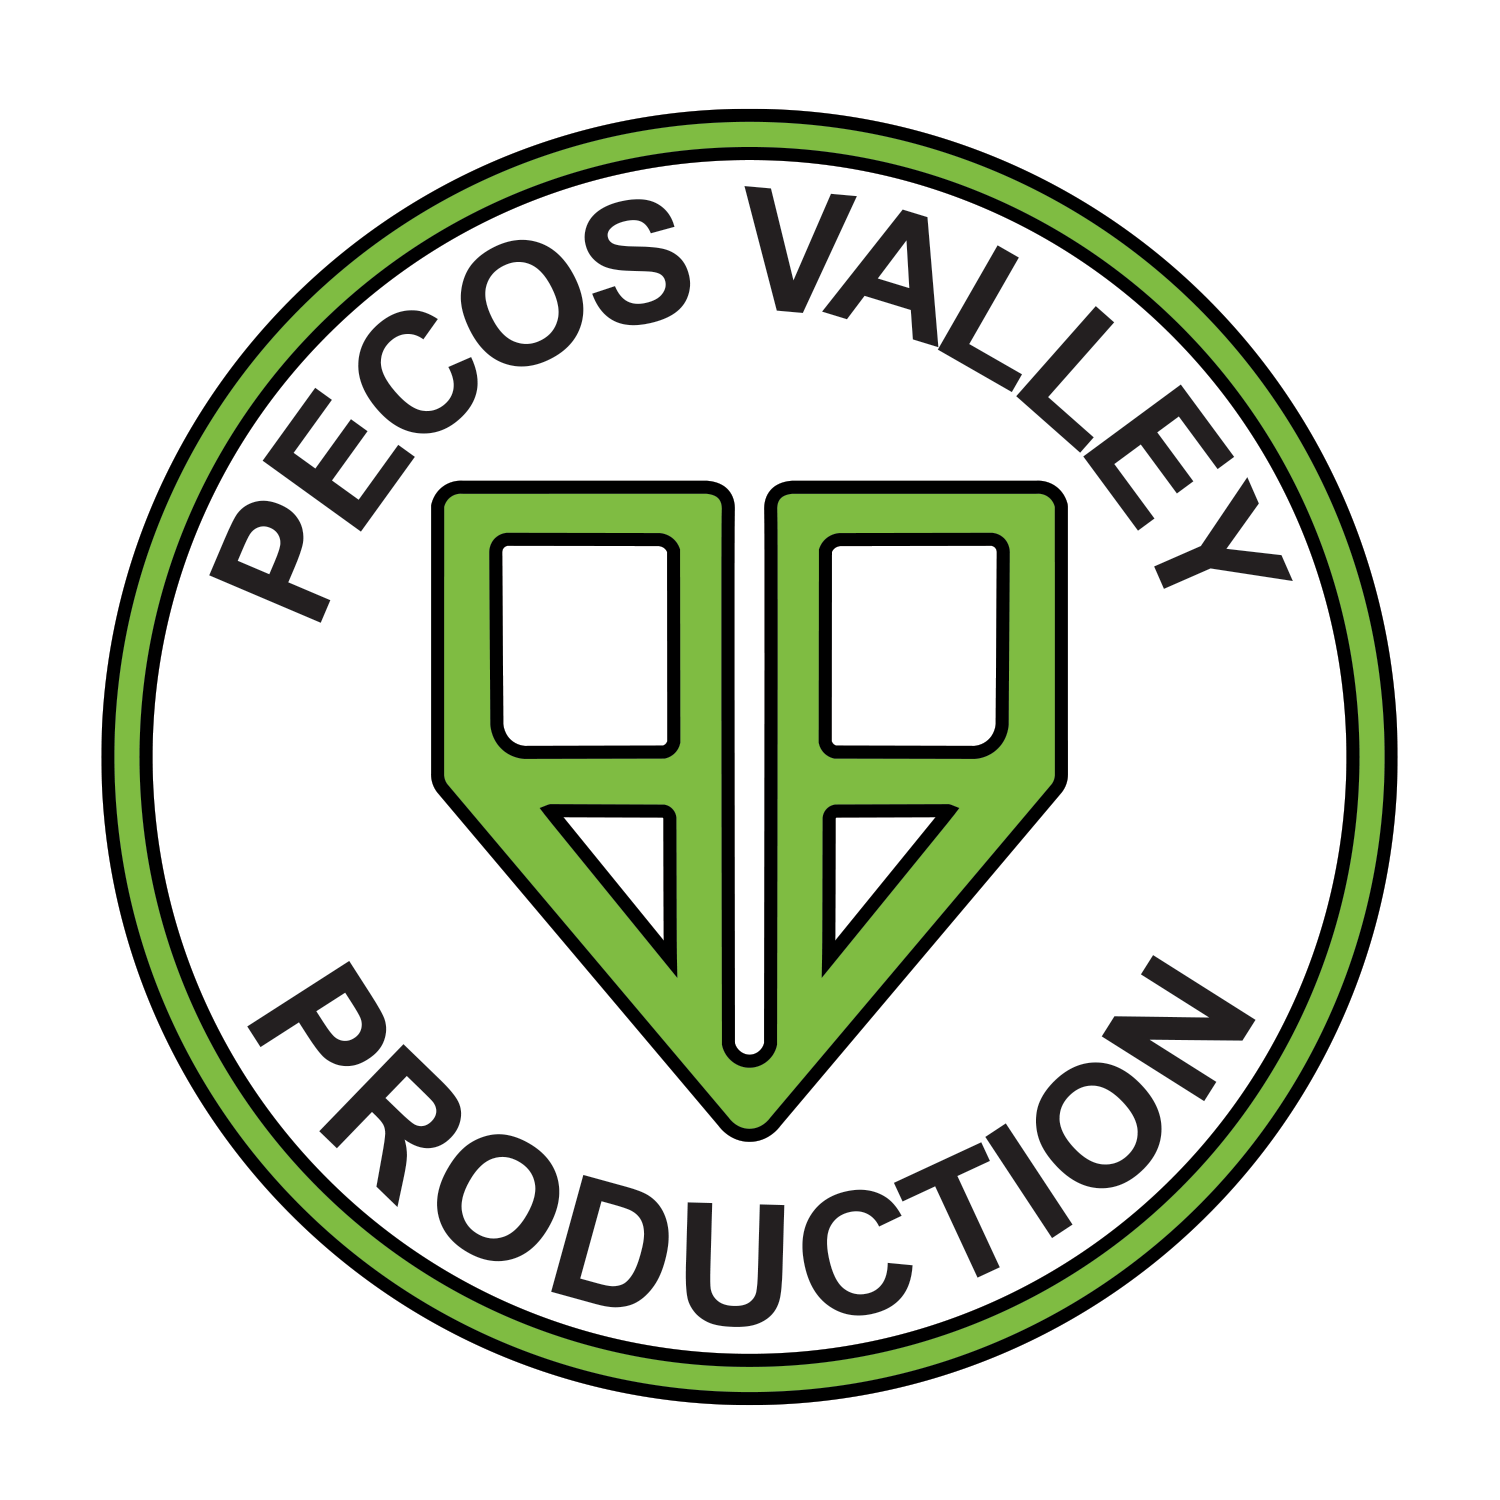 Pecos Valley Productions logo